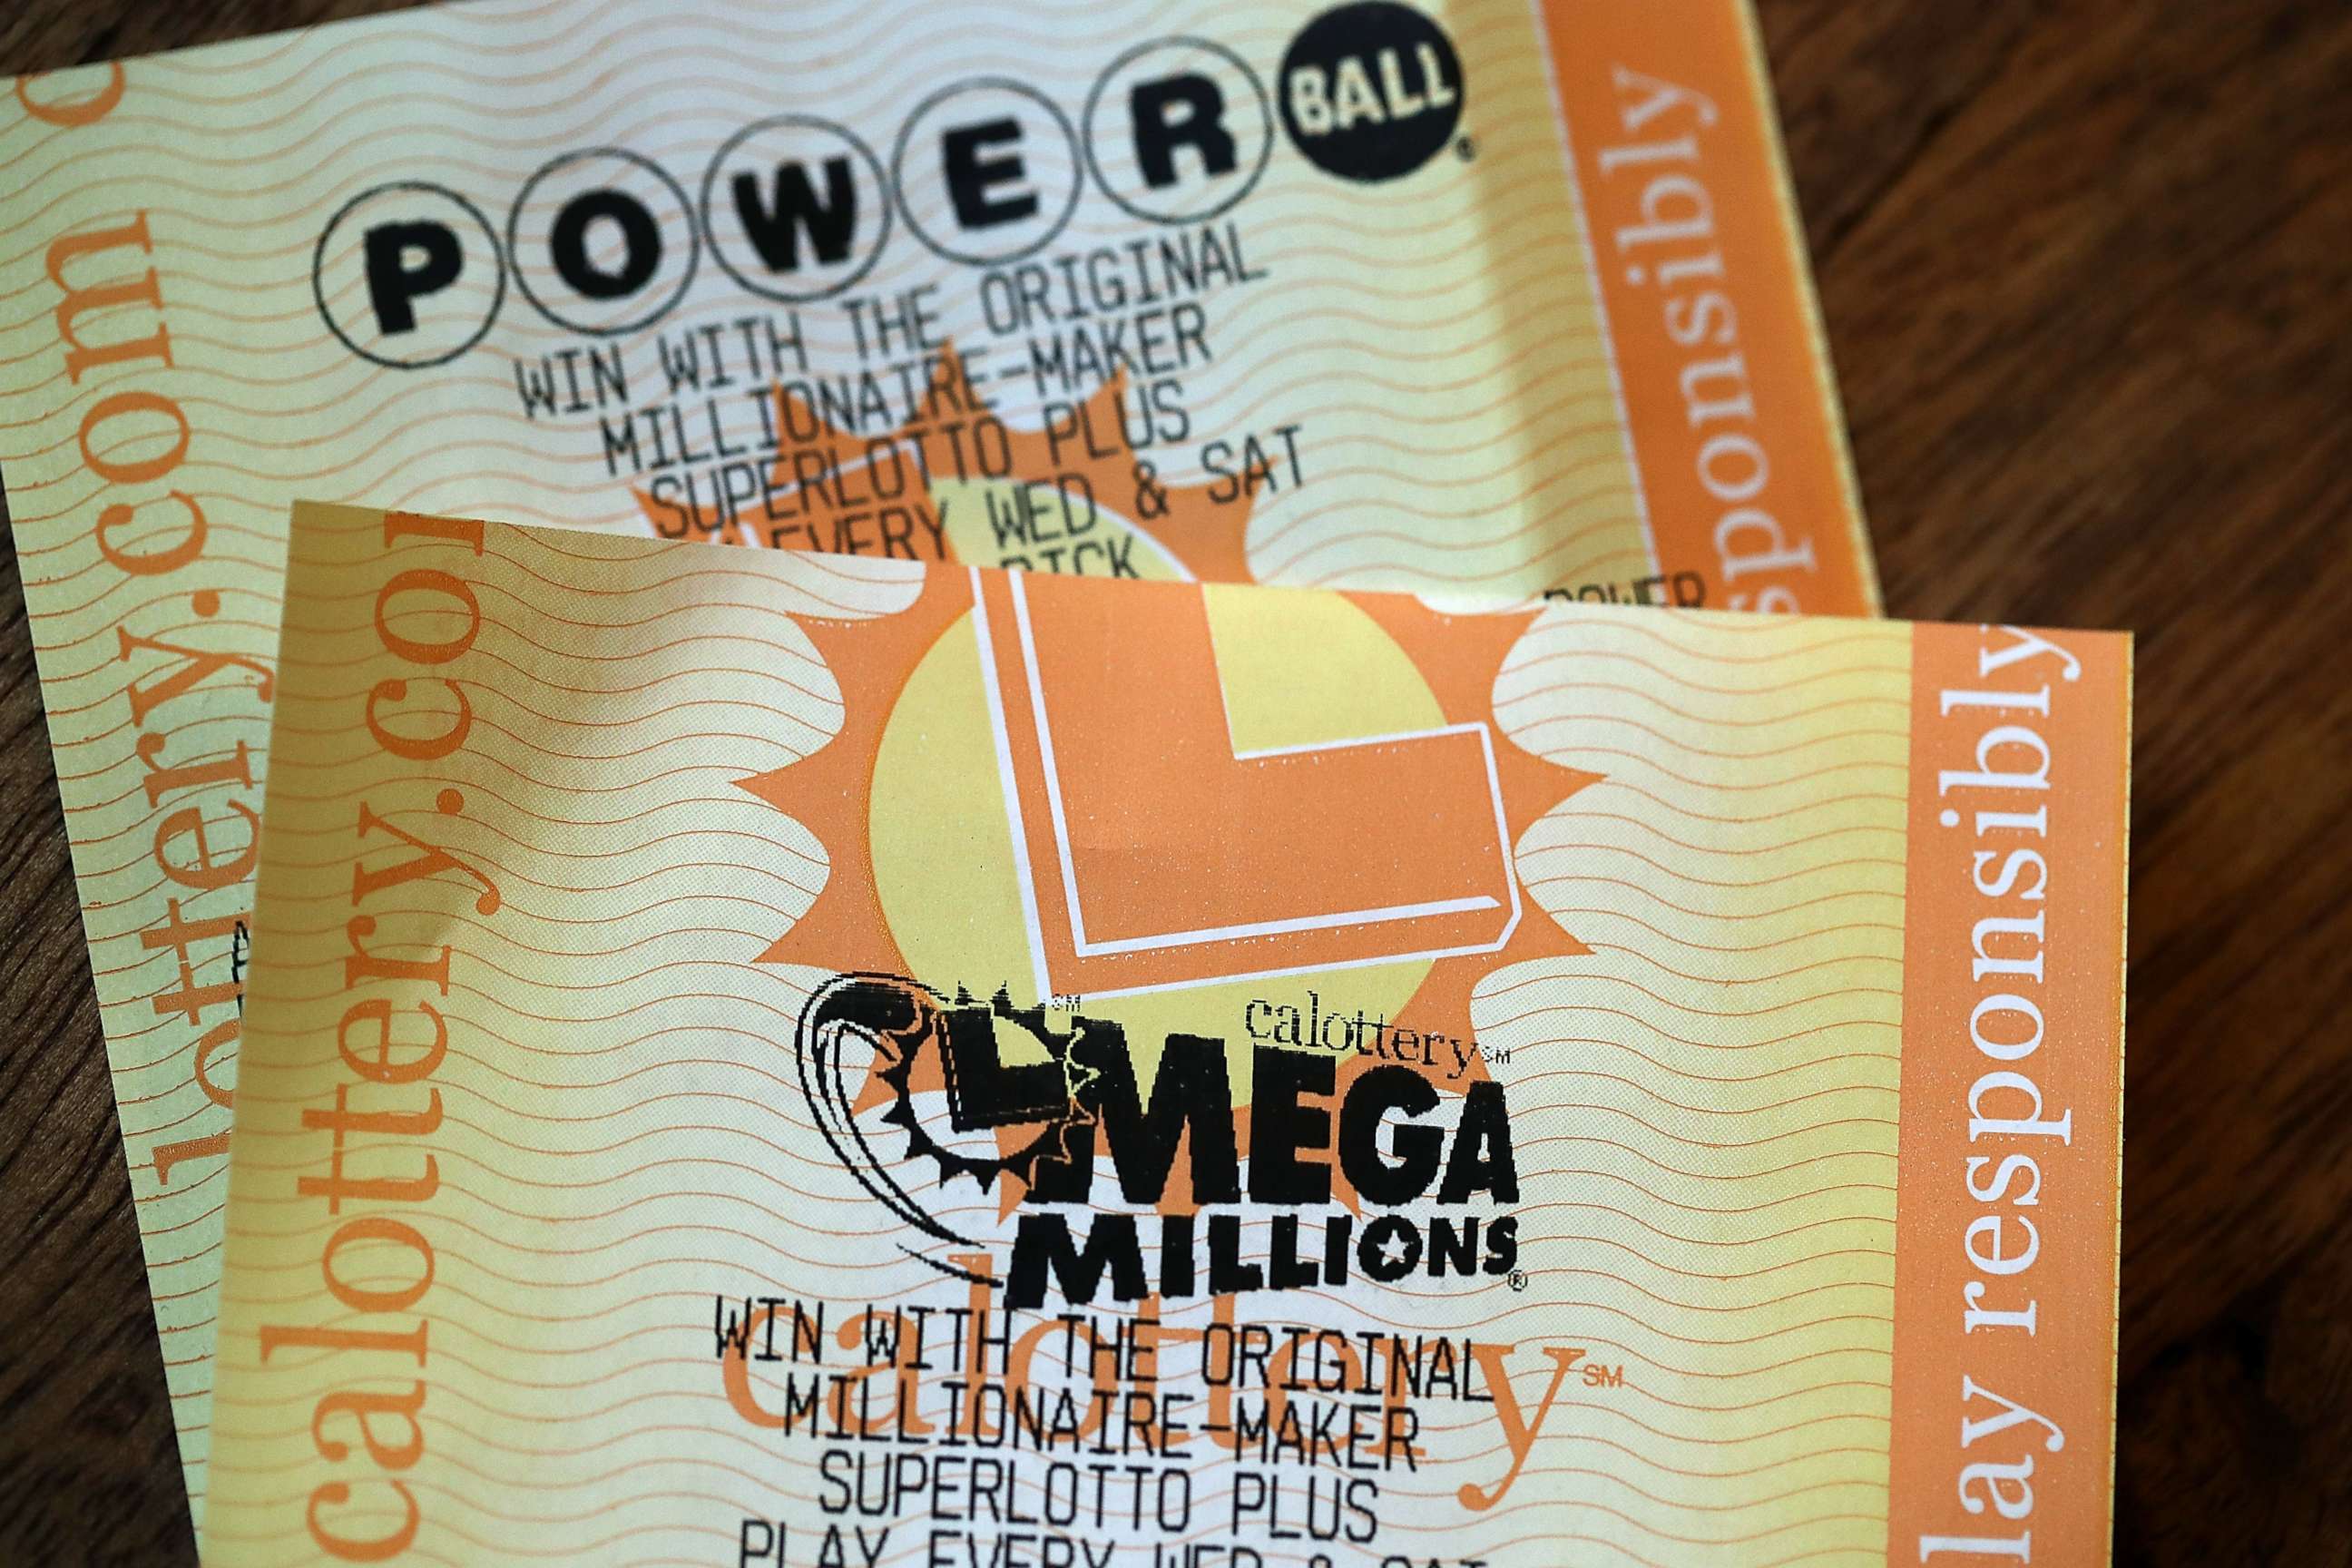 PHOTO: Powerball and Mega Millions lottery tickets are displayed on Jan. 3, 2018 in San Anselmo, California.